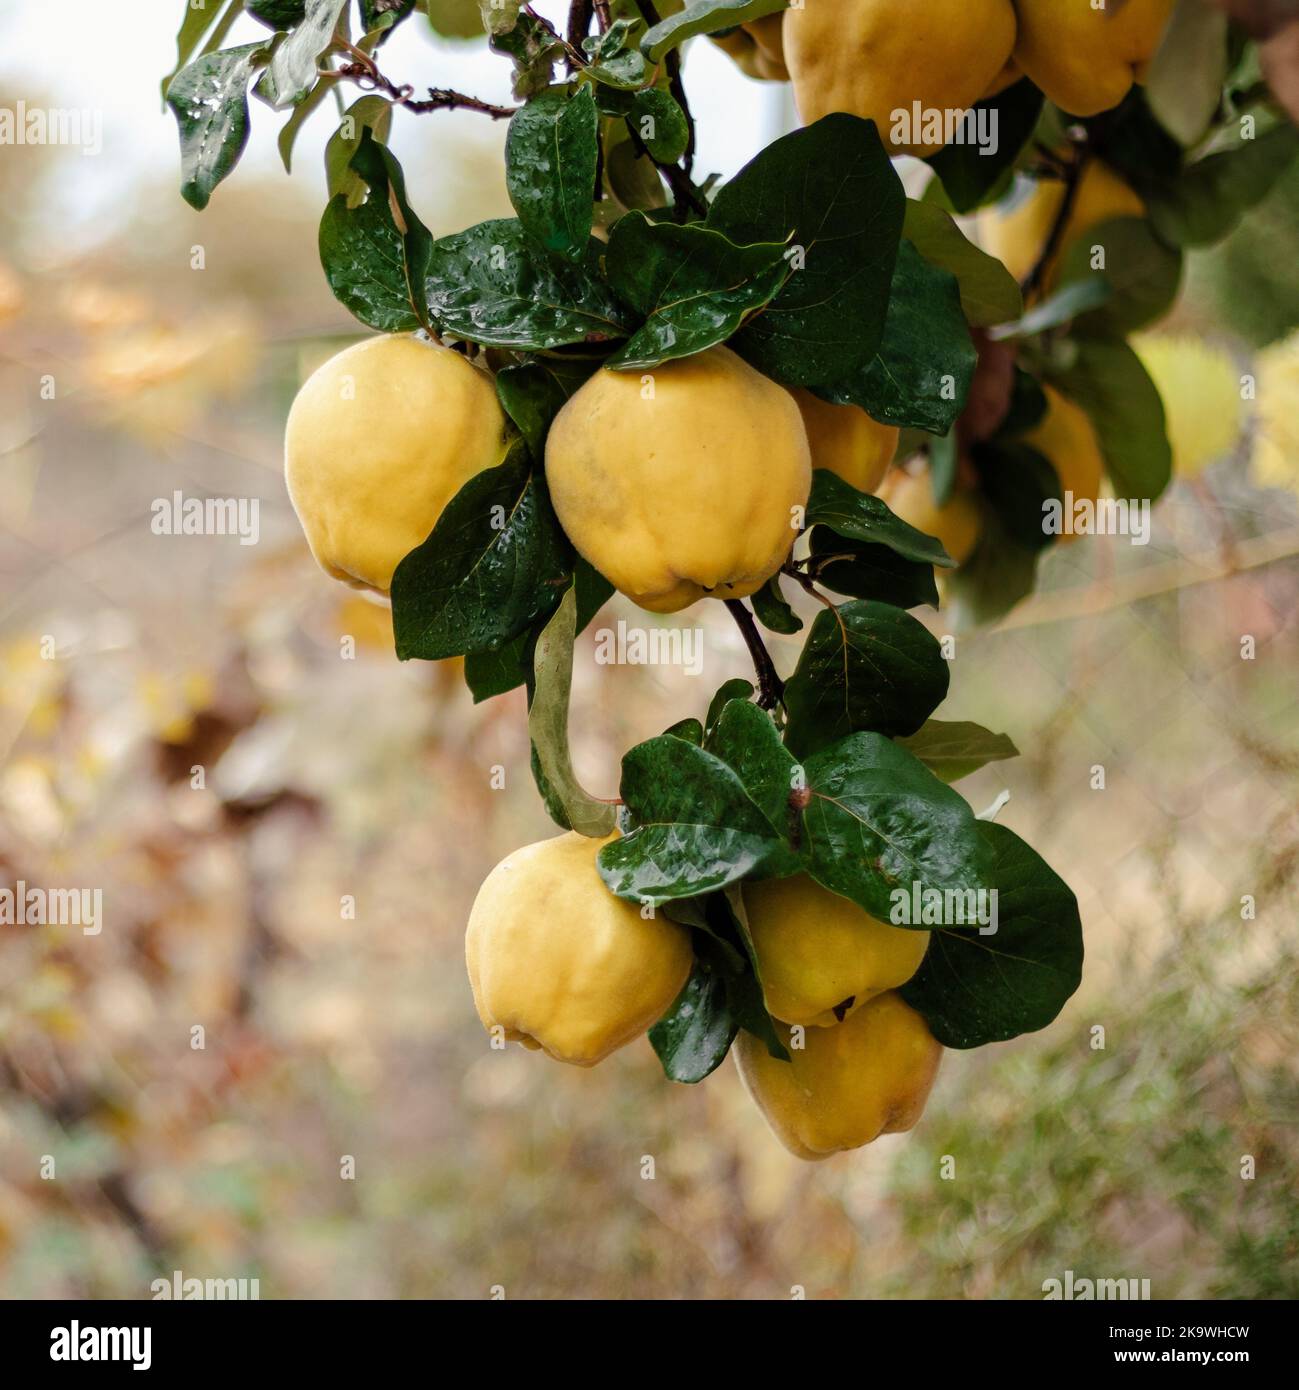 Quince on a tree. Autumn harvest. Healthy organic food. Stock Photo